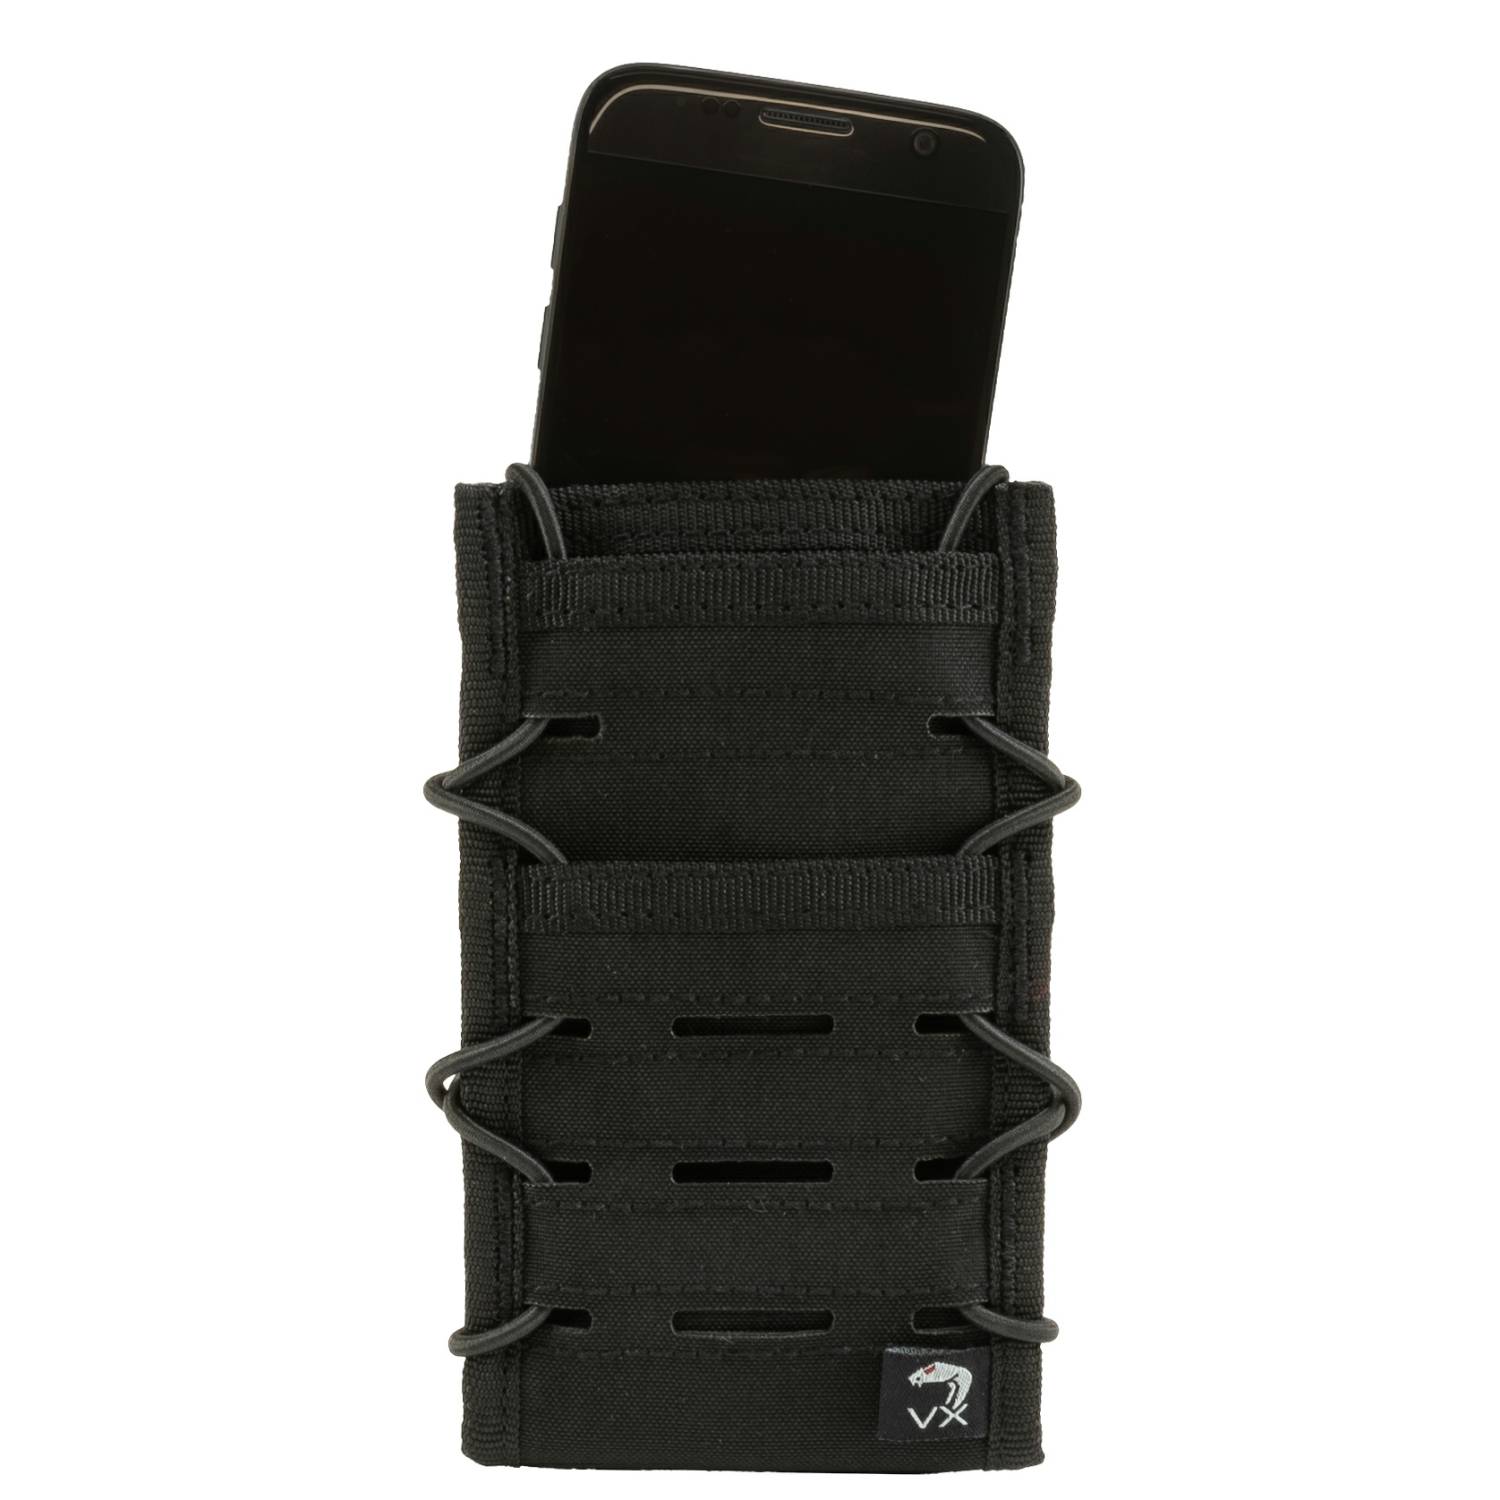  Viper TACTICAL VX Smart Phone Pouch Dark Coyote : Sports &  Outdoors